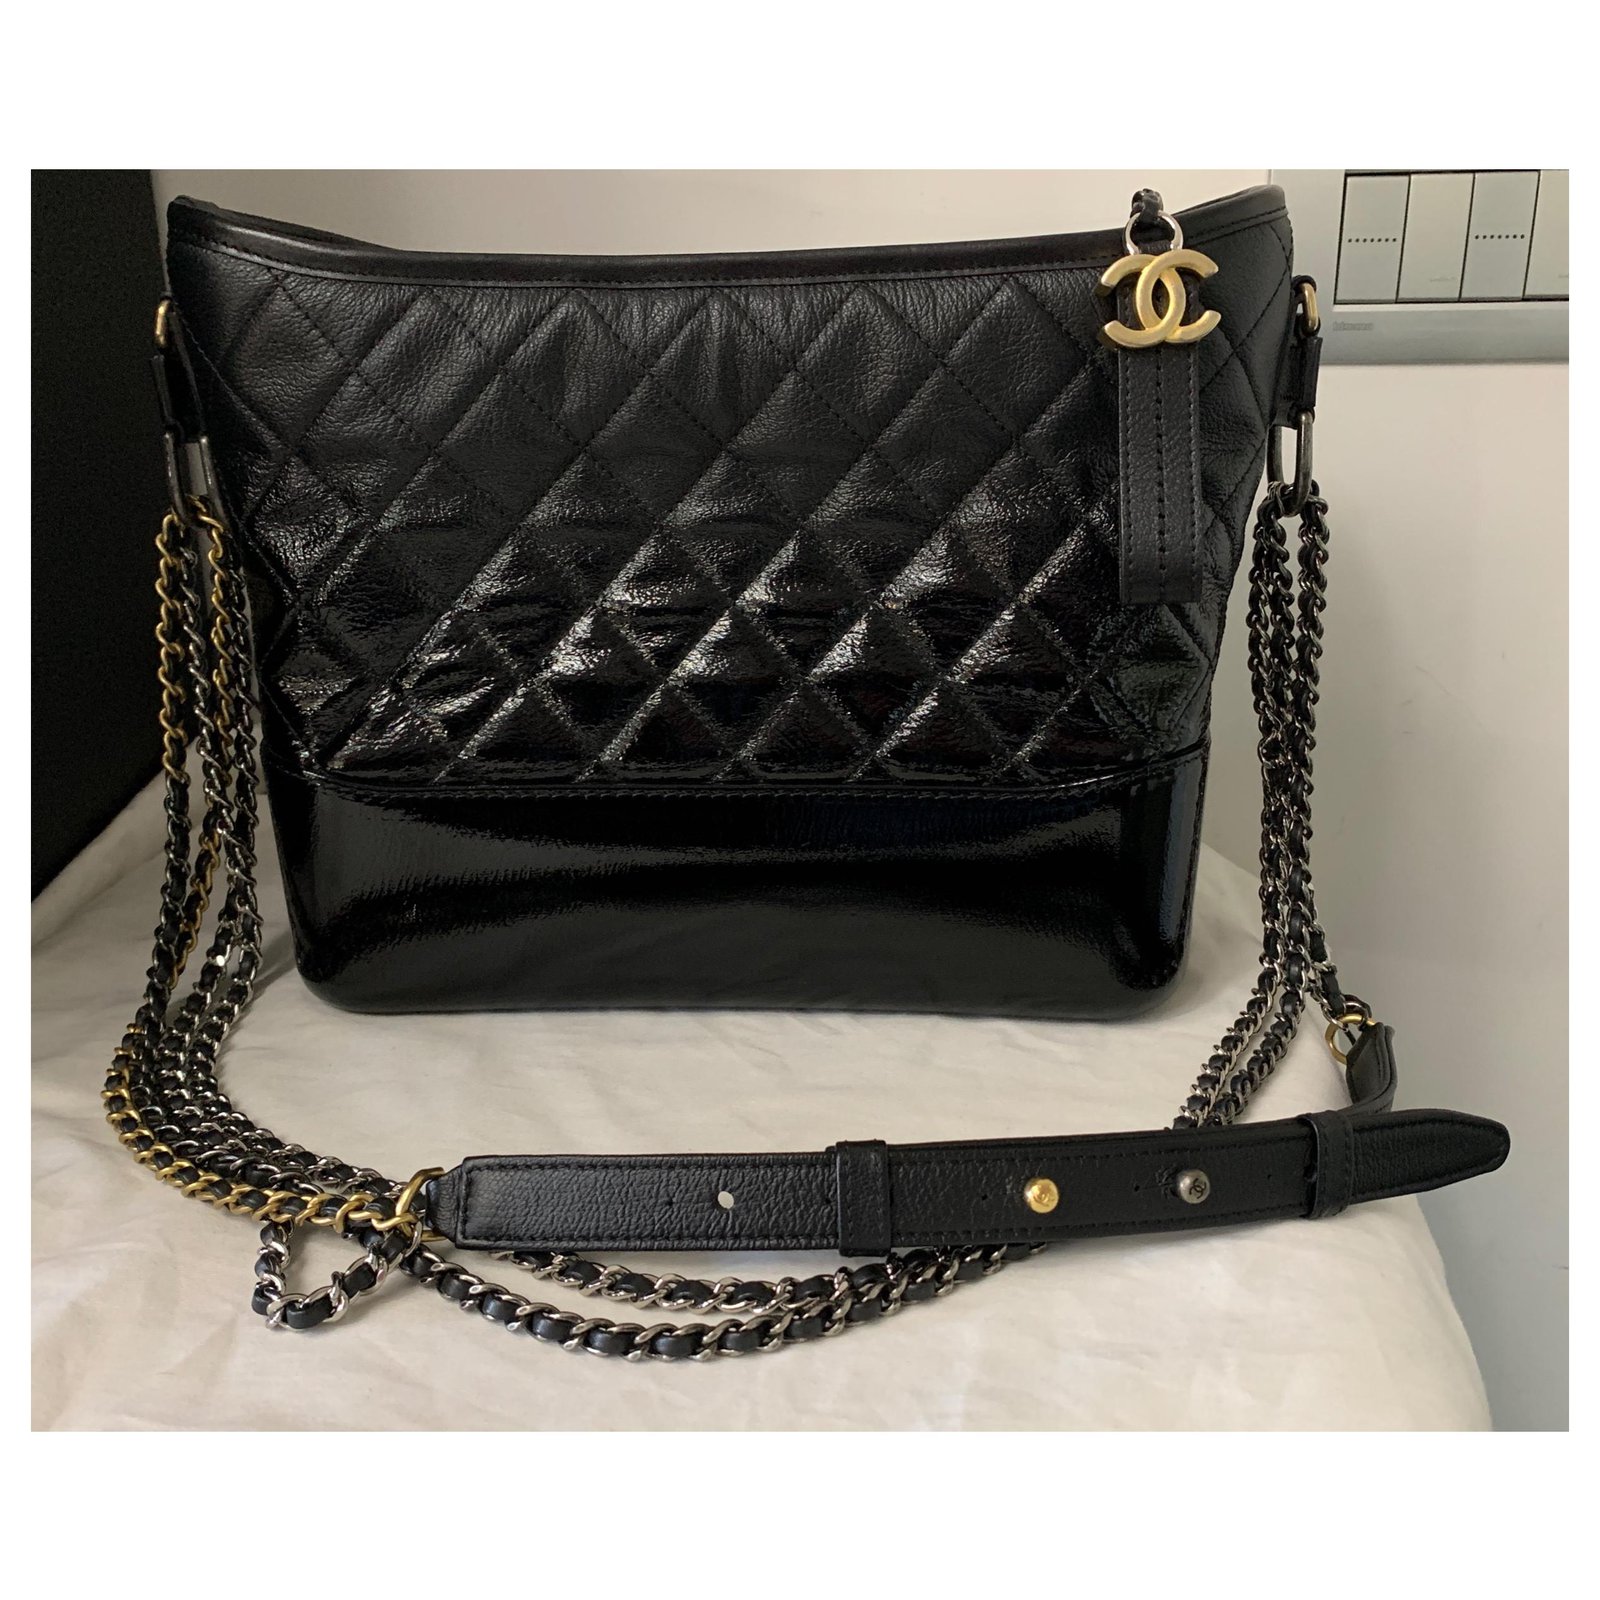 CHANEL bag 'Gabrielle Hobo' in aged black quilted leather - VALOIS VINTAGE  PARIS